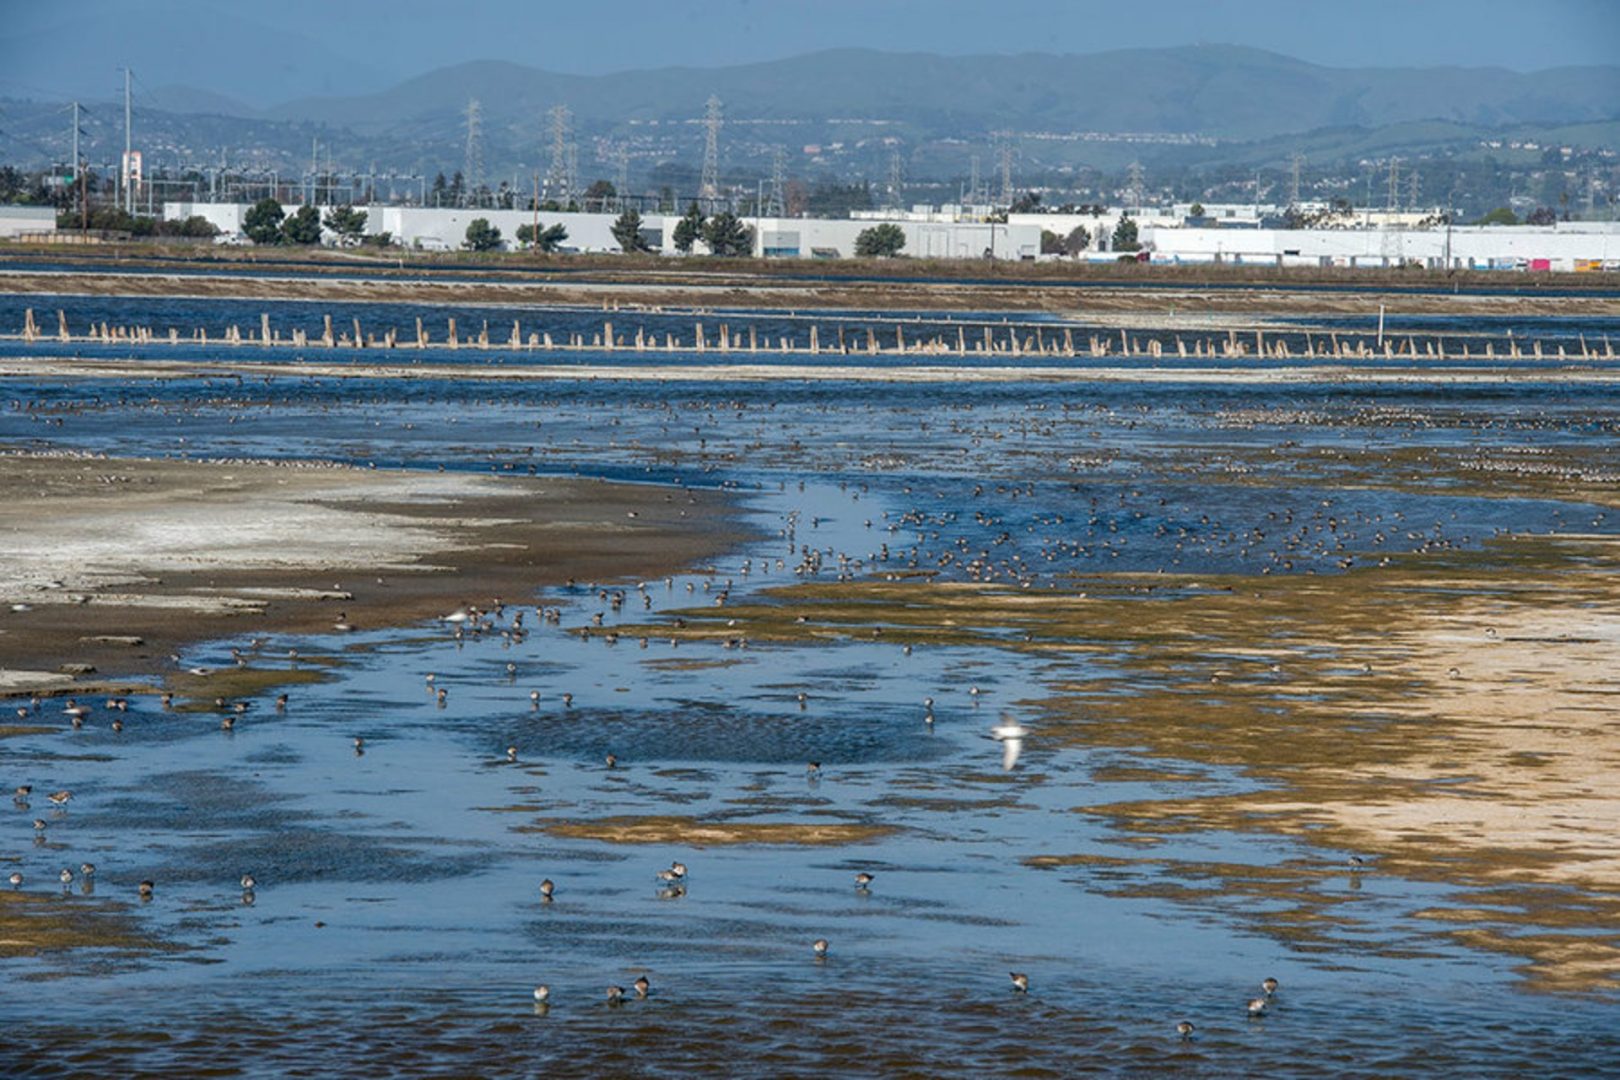 Shorebirds, water birds and gulls take advantage of the low tide at Eden Landing Ecological Reserve on March 13, 2020 in Hayward, California. After many years as a salt production area, the reserve is being rehabilitated as a habitat for native plants and endangered species.